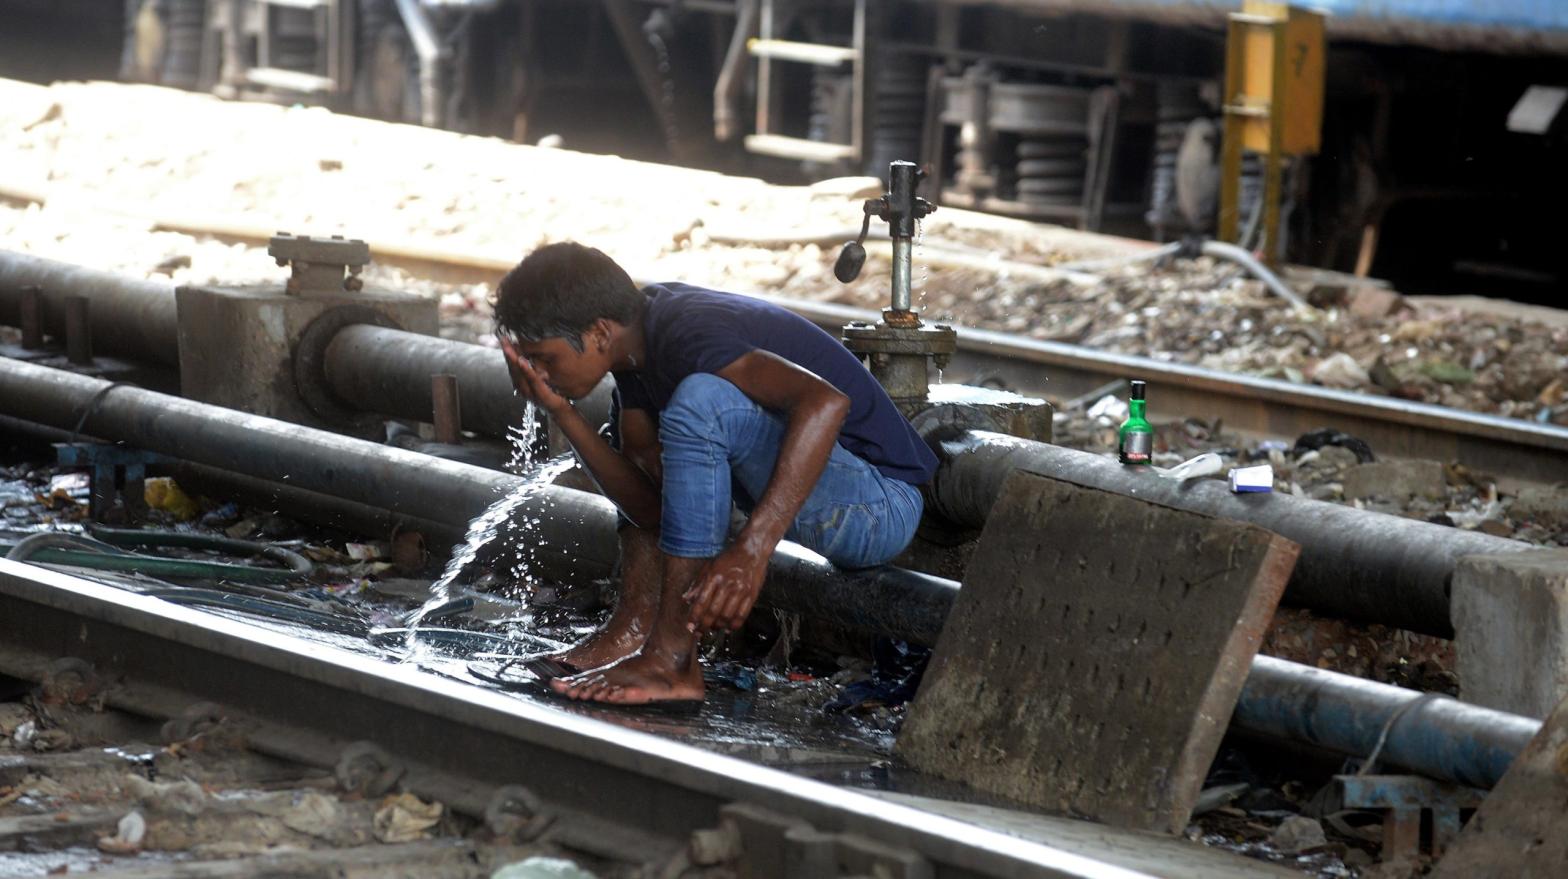 A man washes himself at a water pipe to cool down along the railway tracks in New Delhi. (Photo: RAVEENDRAN/AFP, Getty Images)